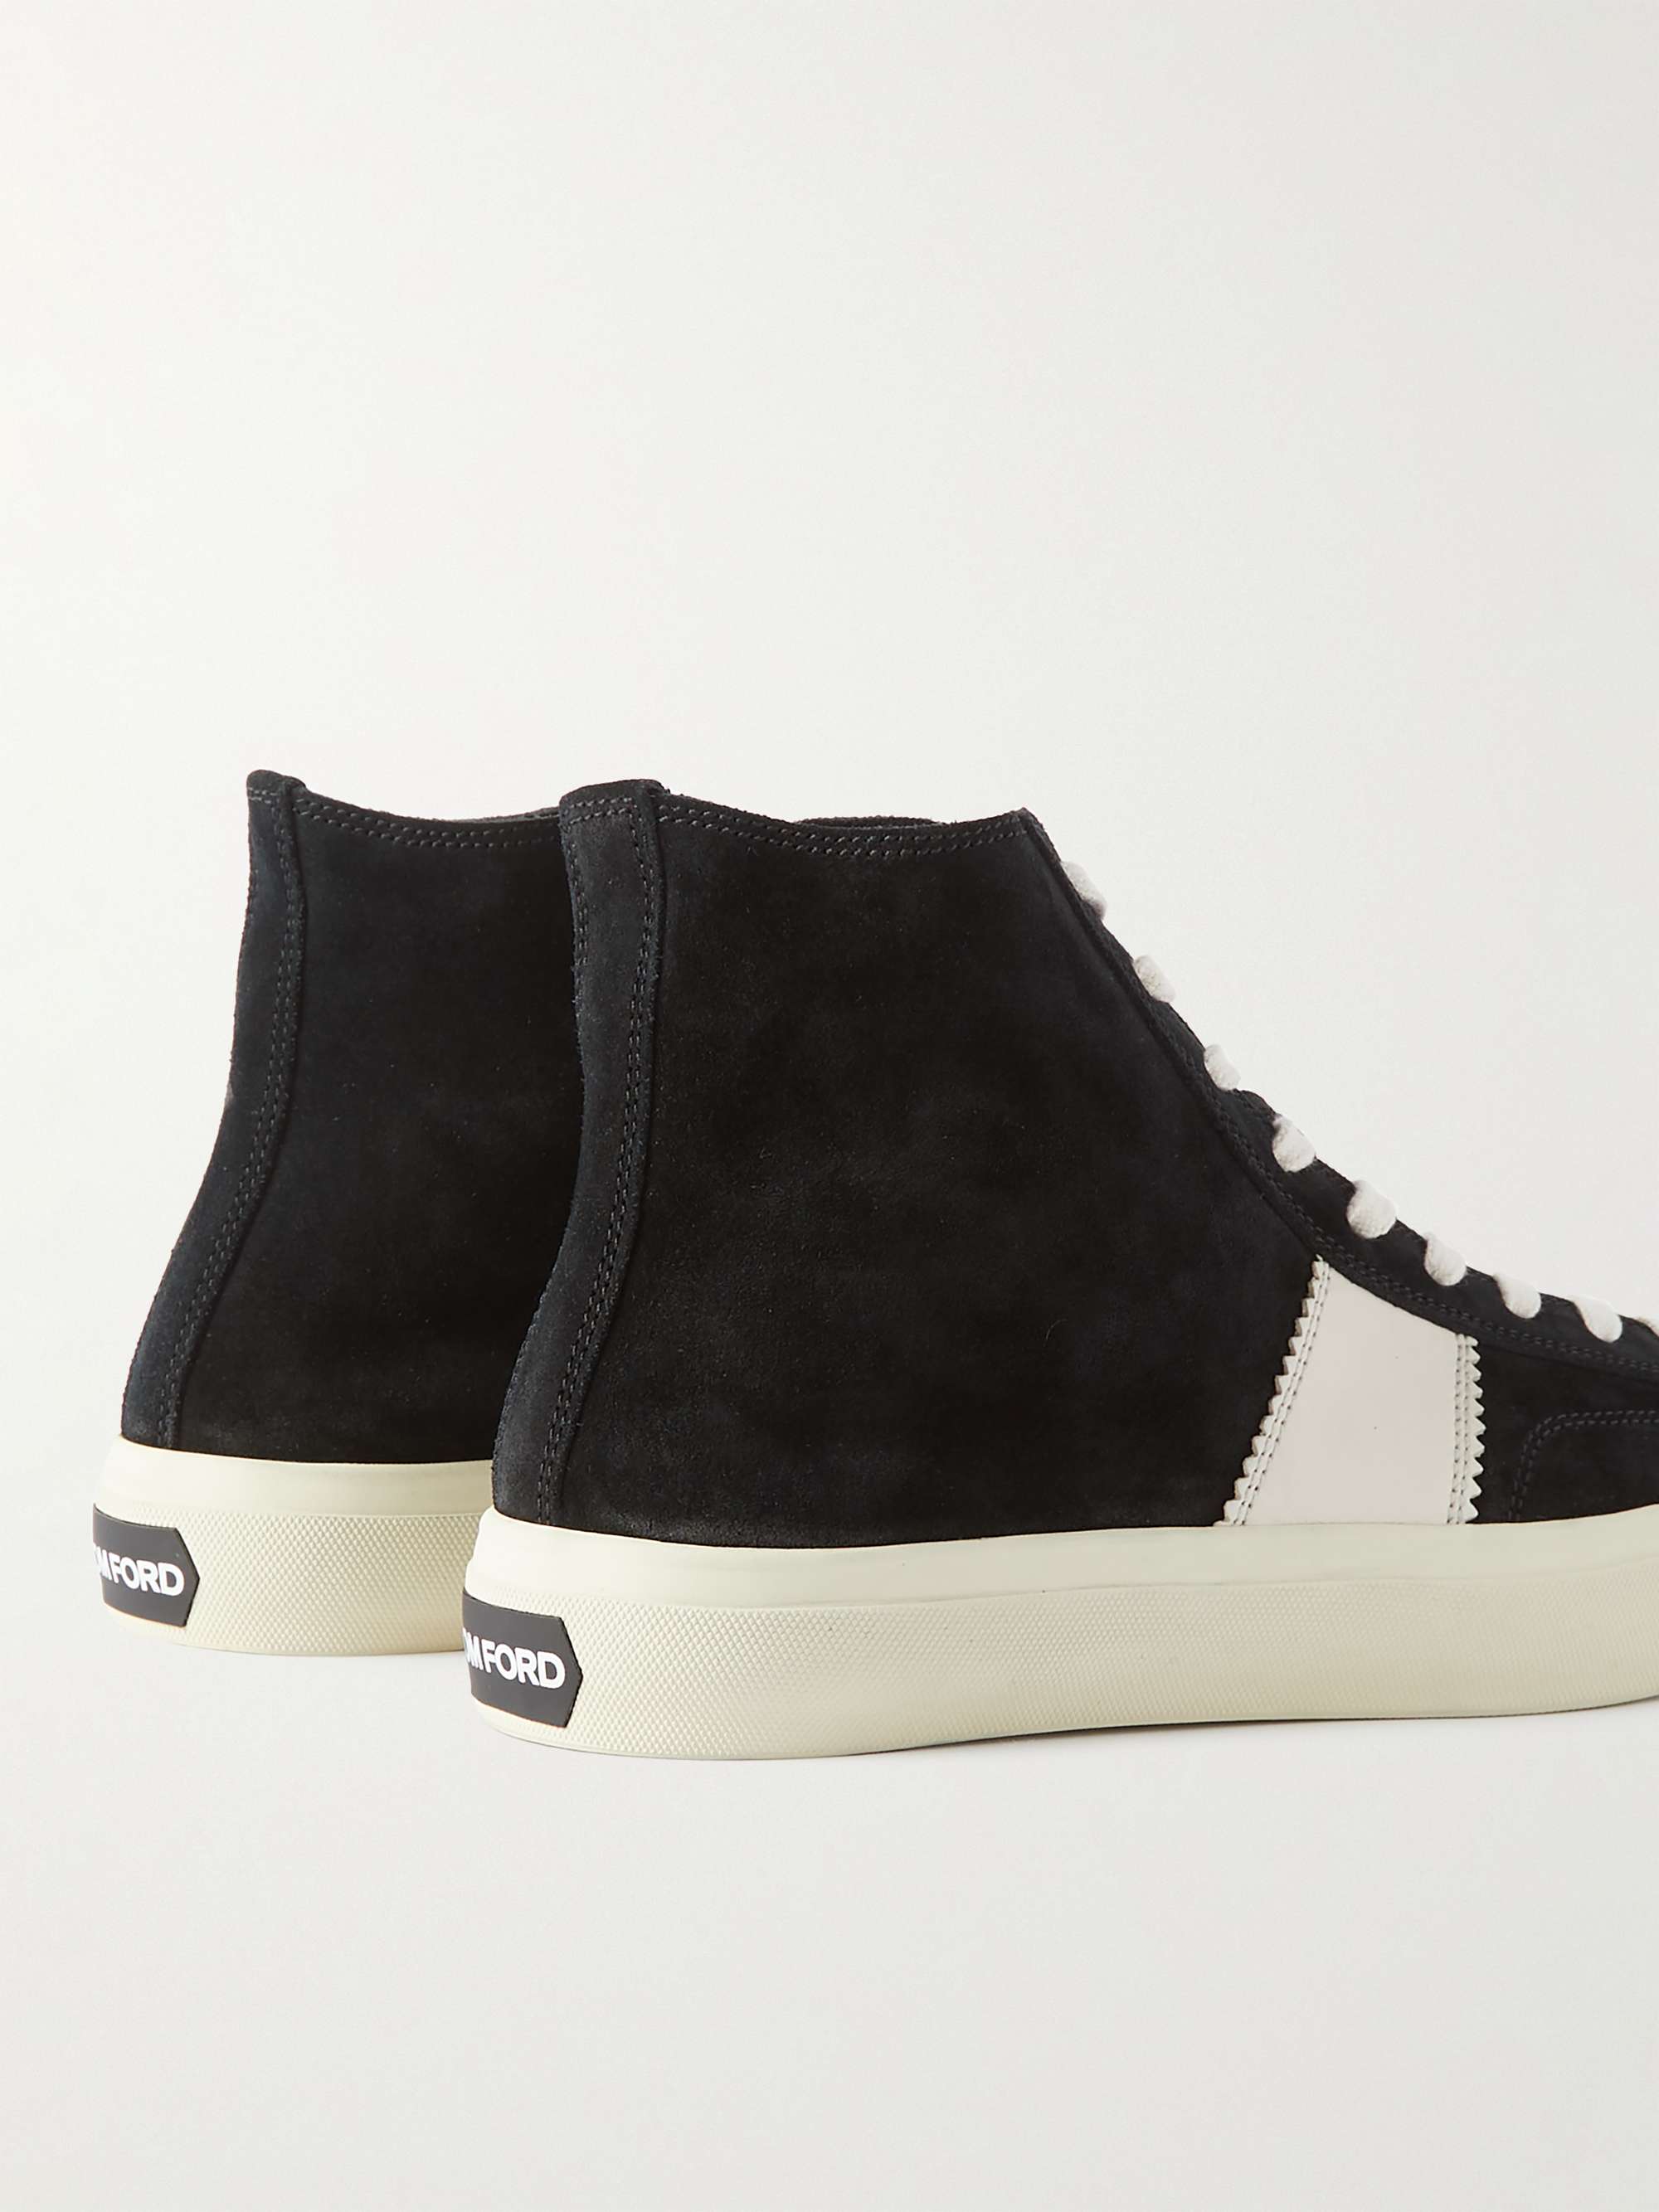 TOM FORD Cambridge Leaher-Trimmed Suede High-Top Sneakers